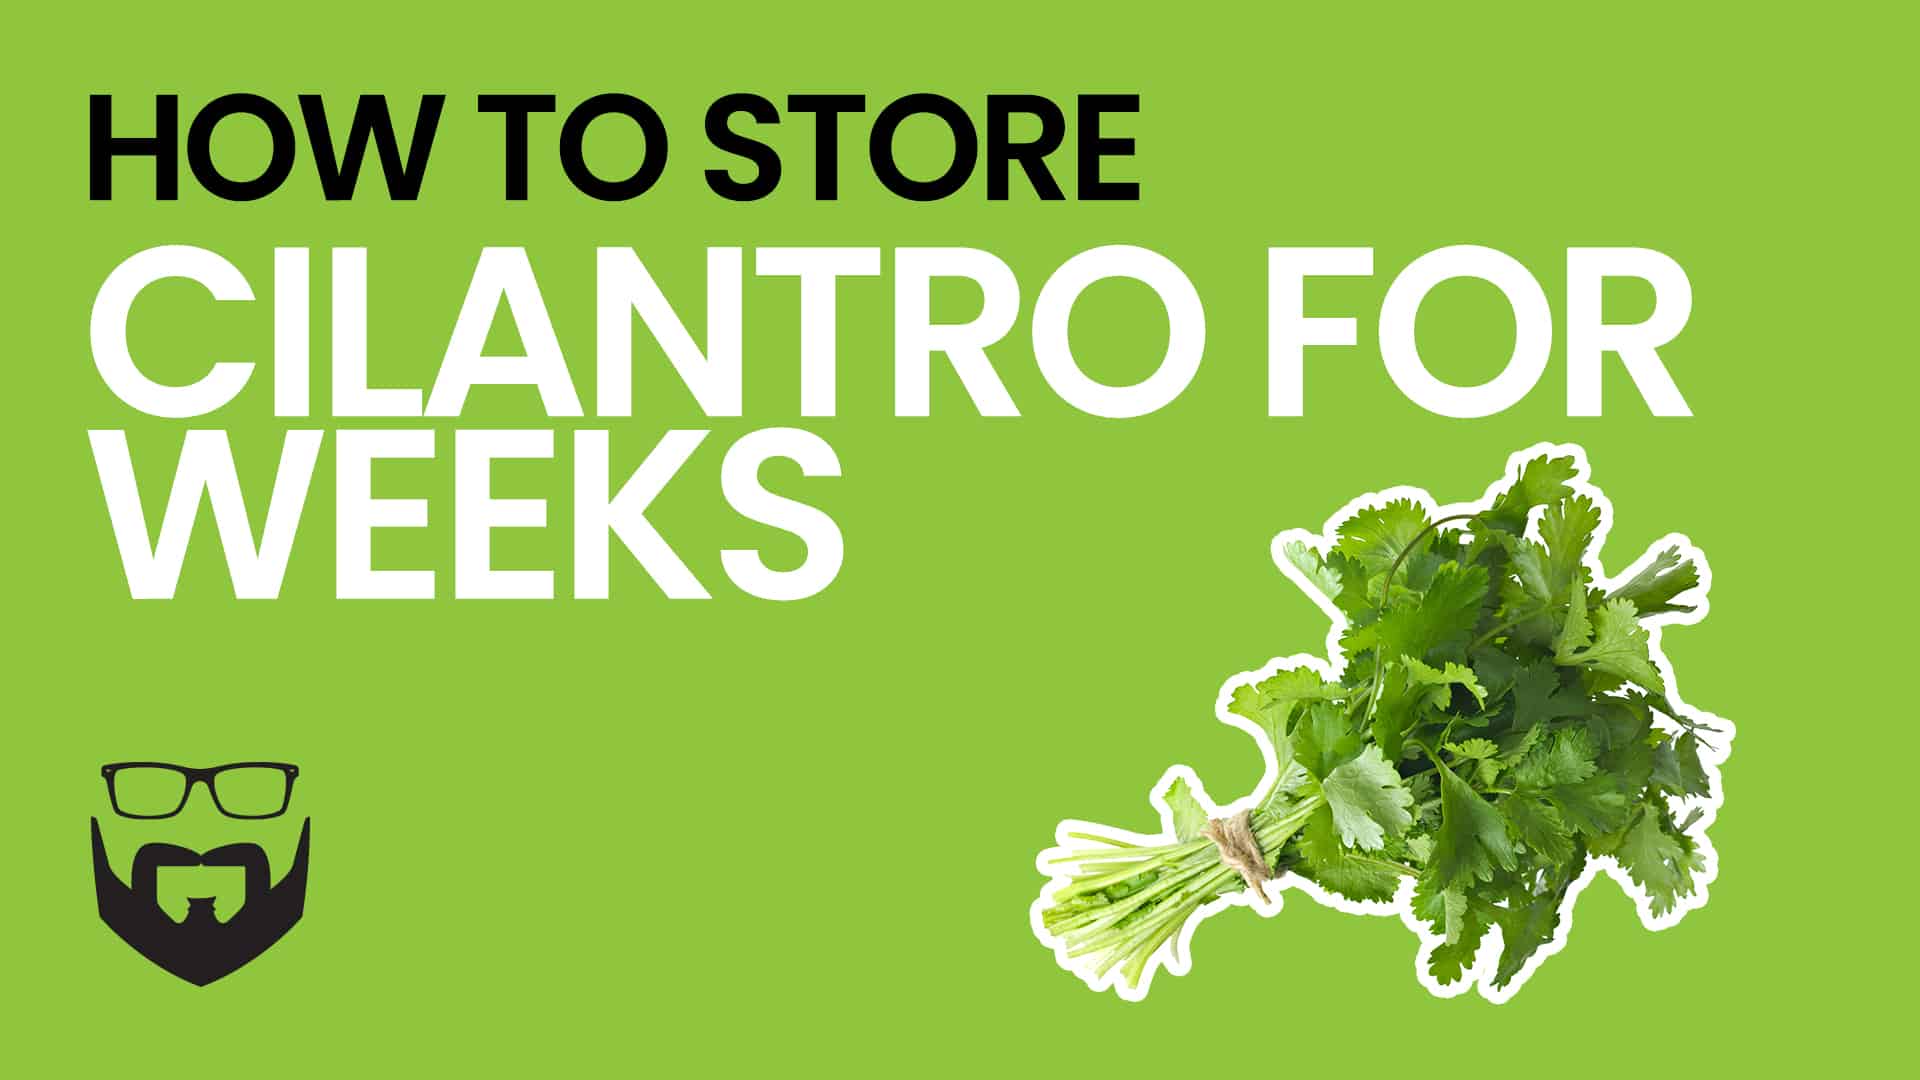 How to Store Cilantro for Weeks Video - Green